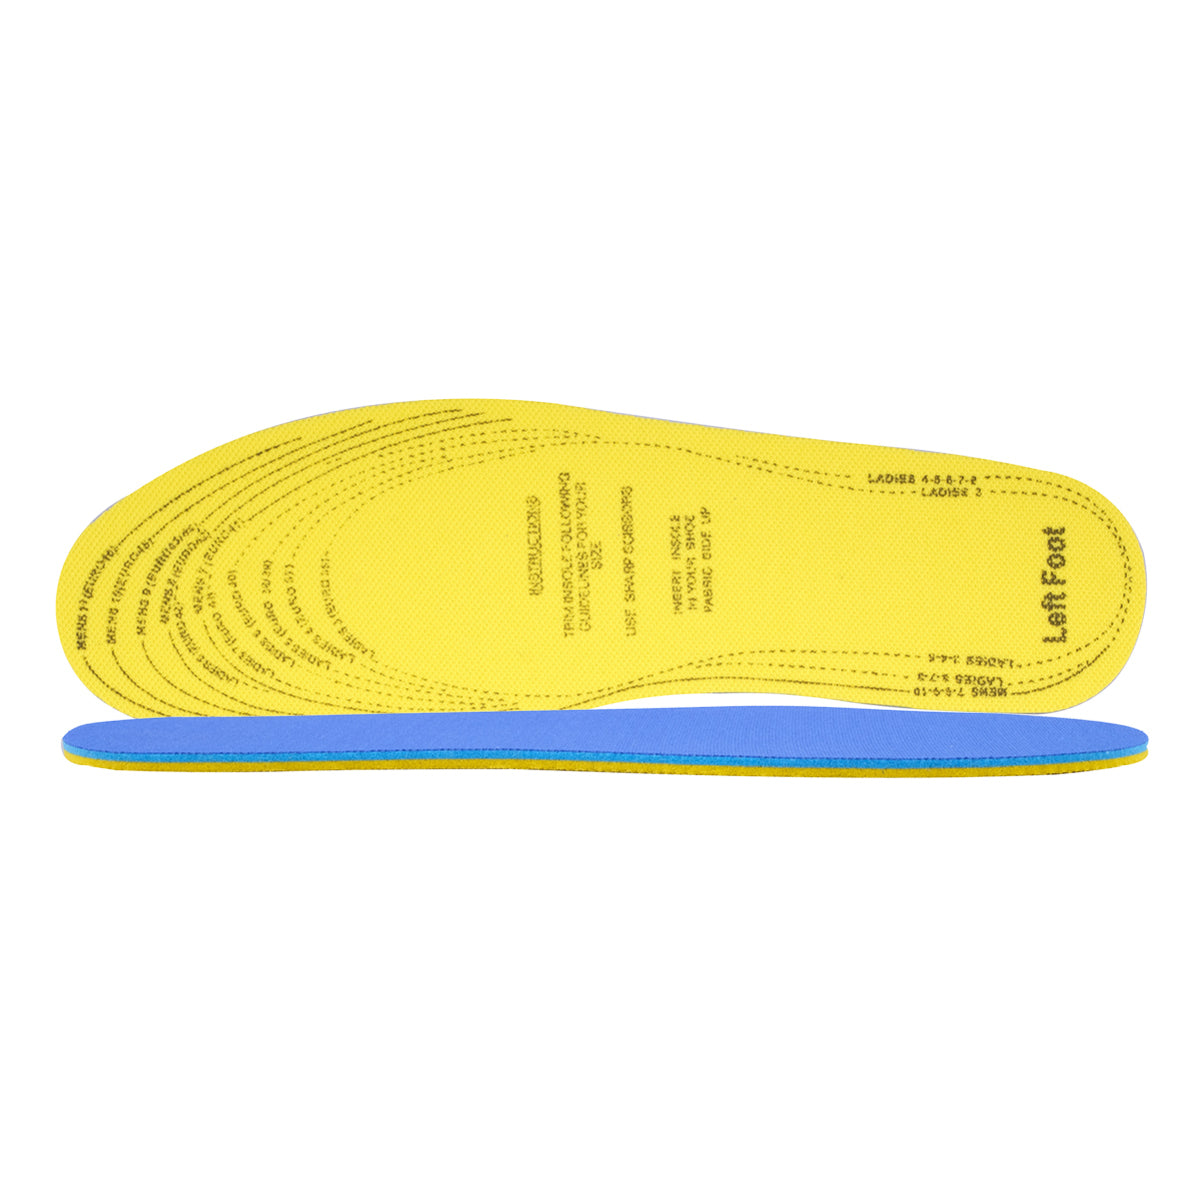 1st Care 24 Pairs Unisex Double Layered Insoles Support & Pressure Relief